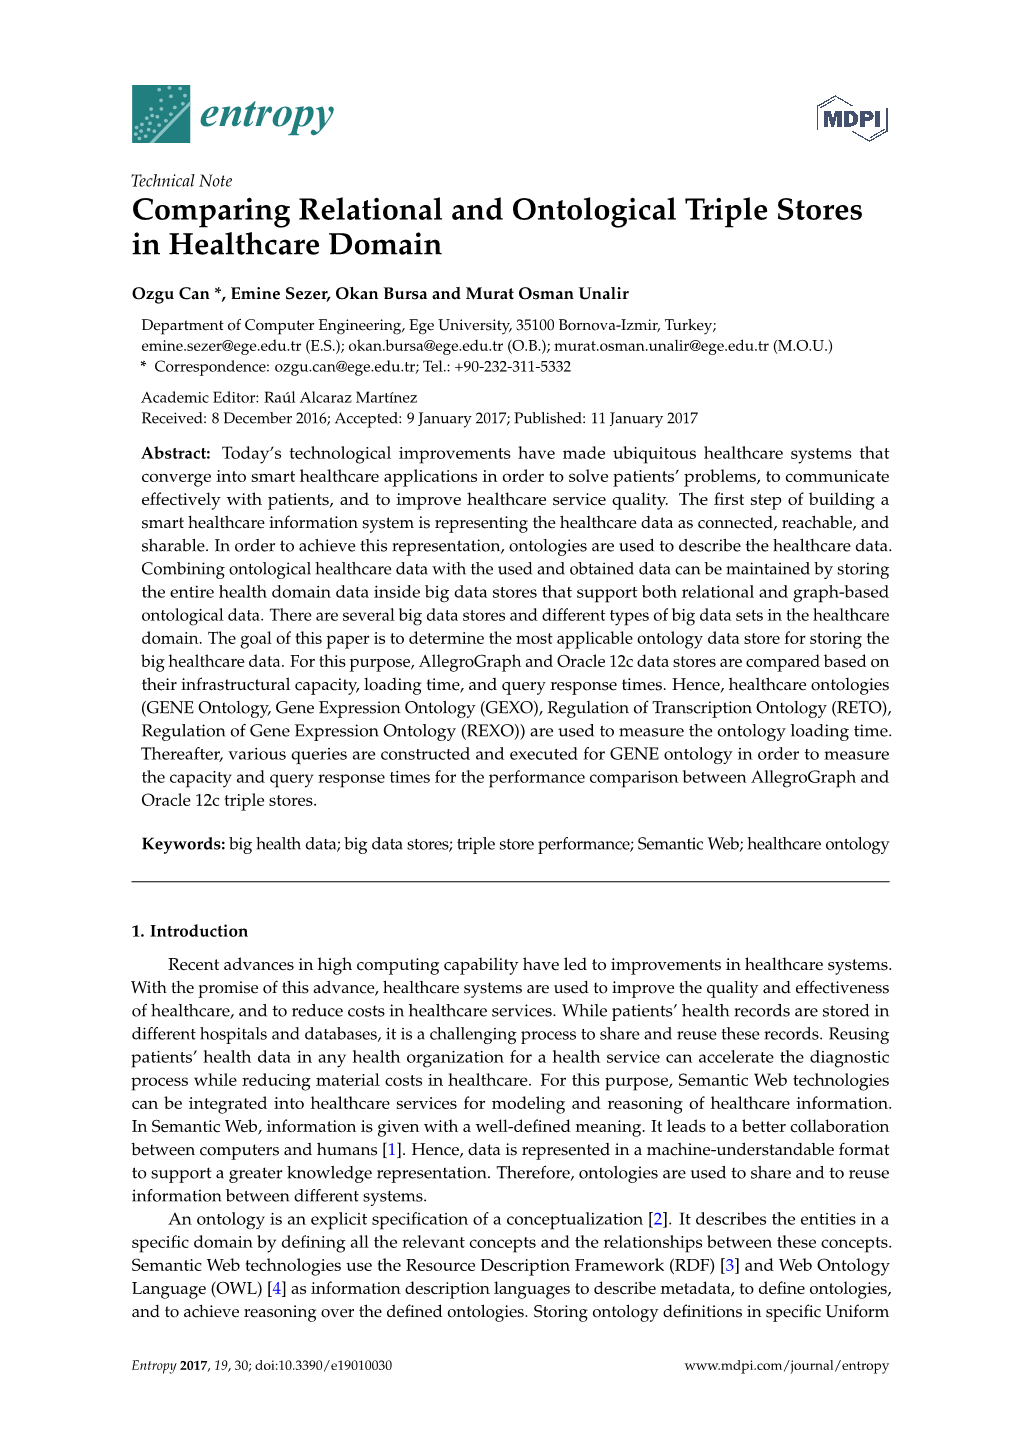 Comparing Relational and Ontological Triple Stores in Healthcare Domain